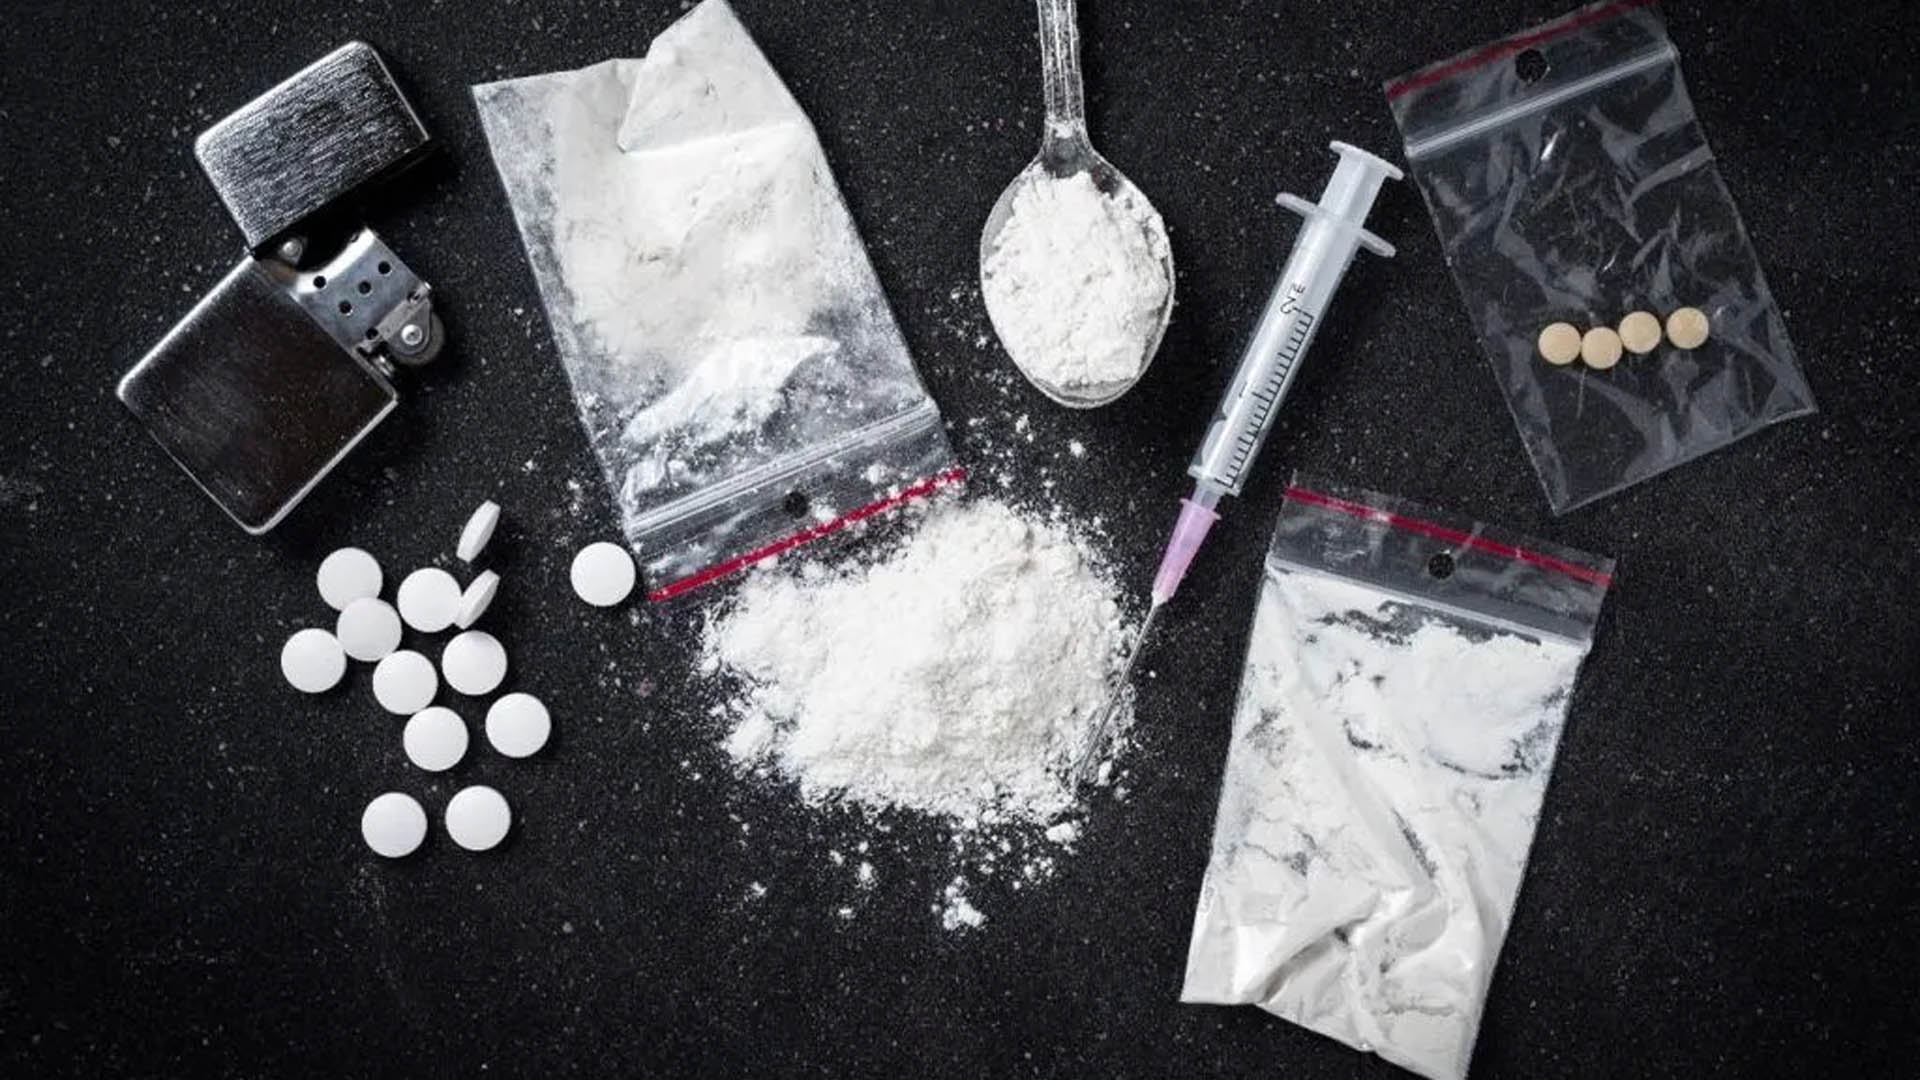 Police busted three meth labs, seized 100 kg of drugs in Greater Noida